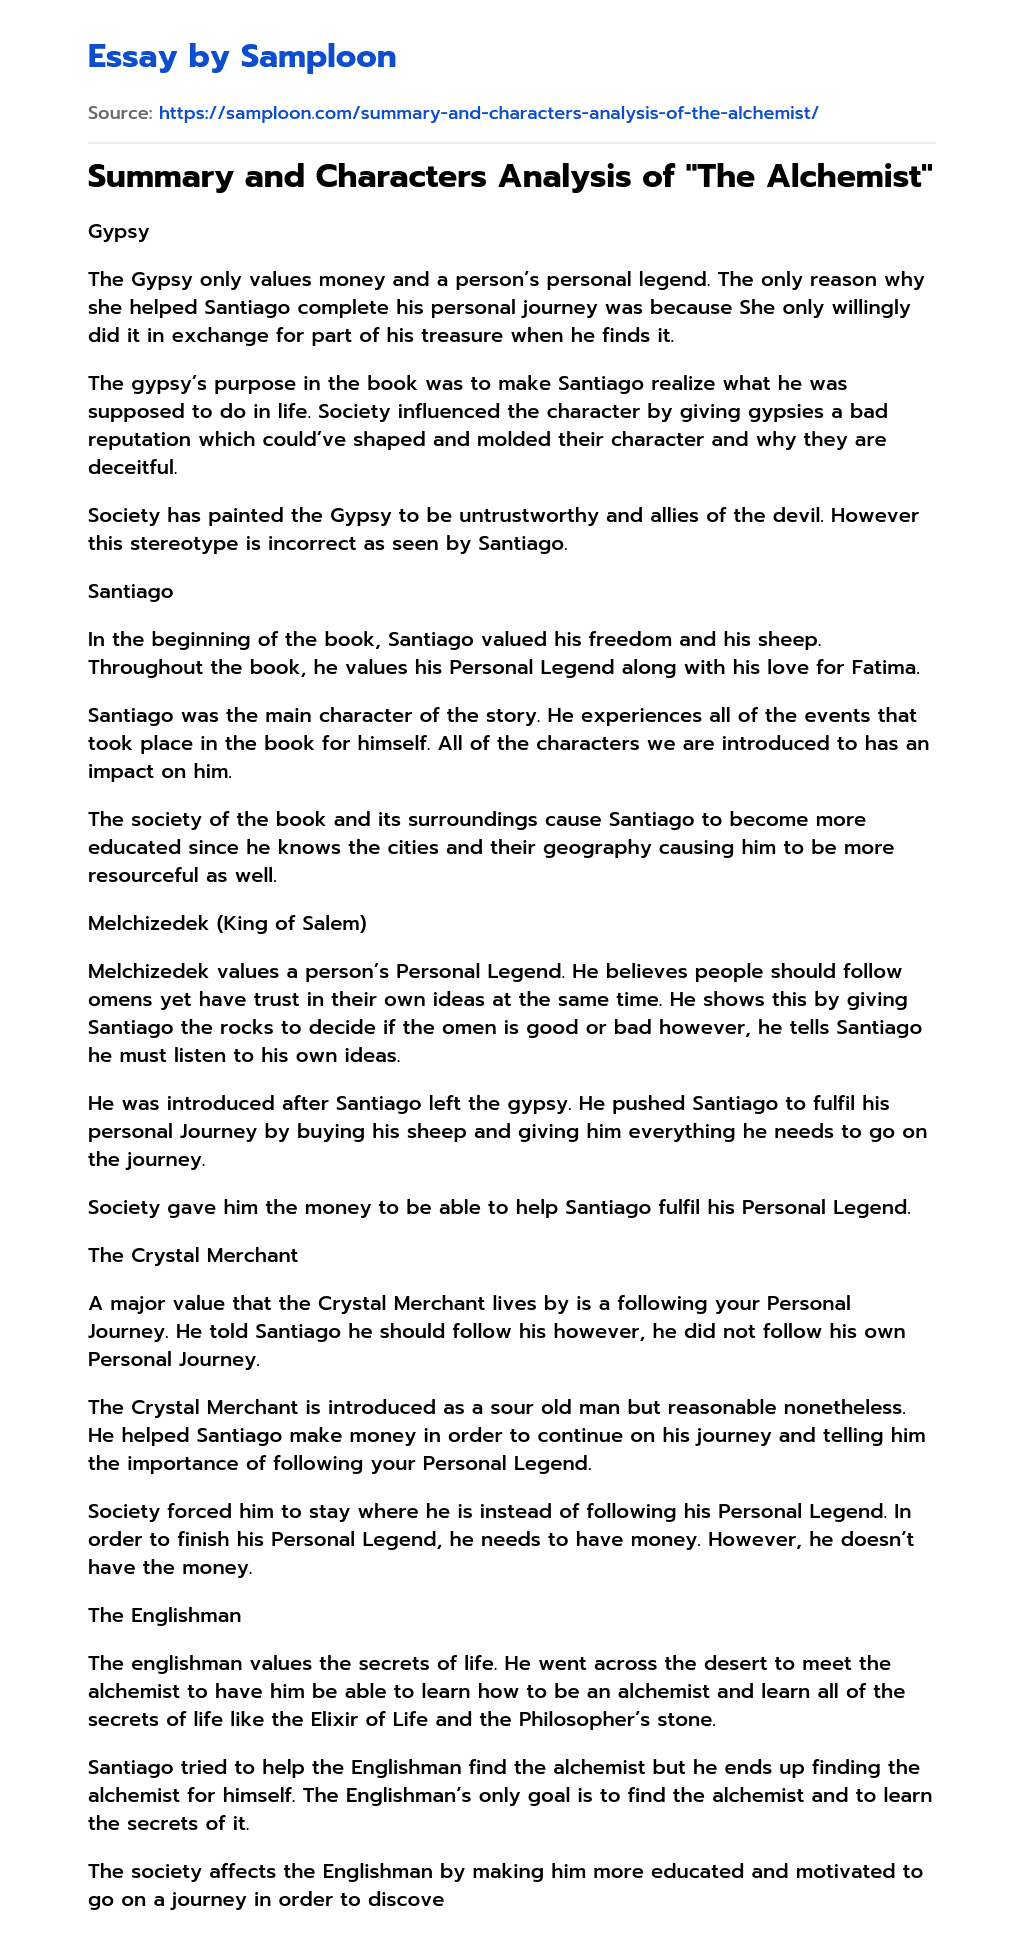 Summary and Characters Analysis of “The Alchemist” essay